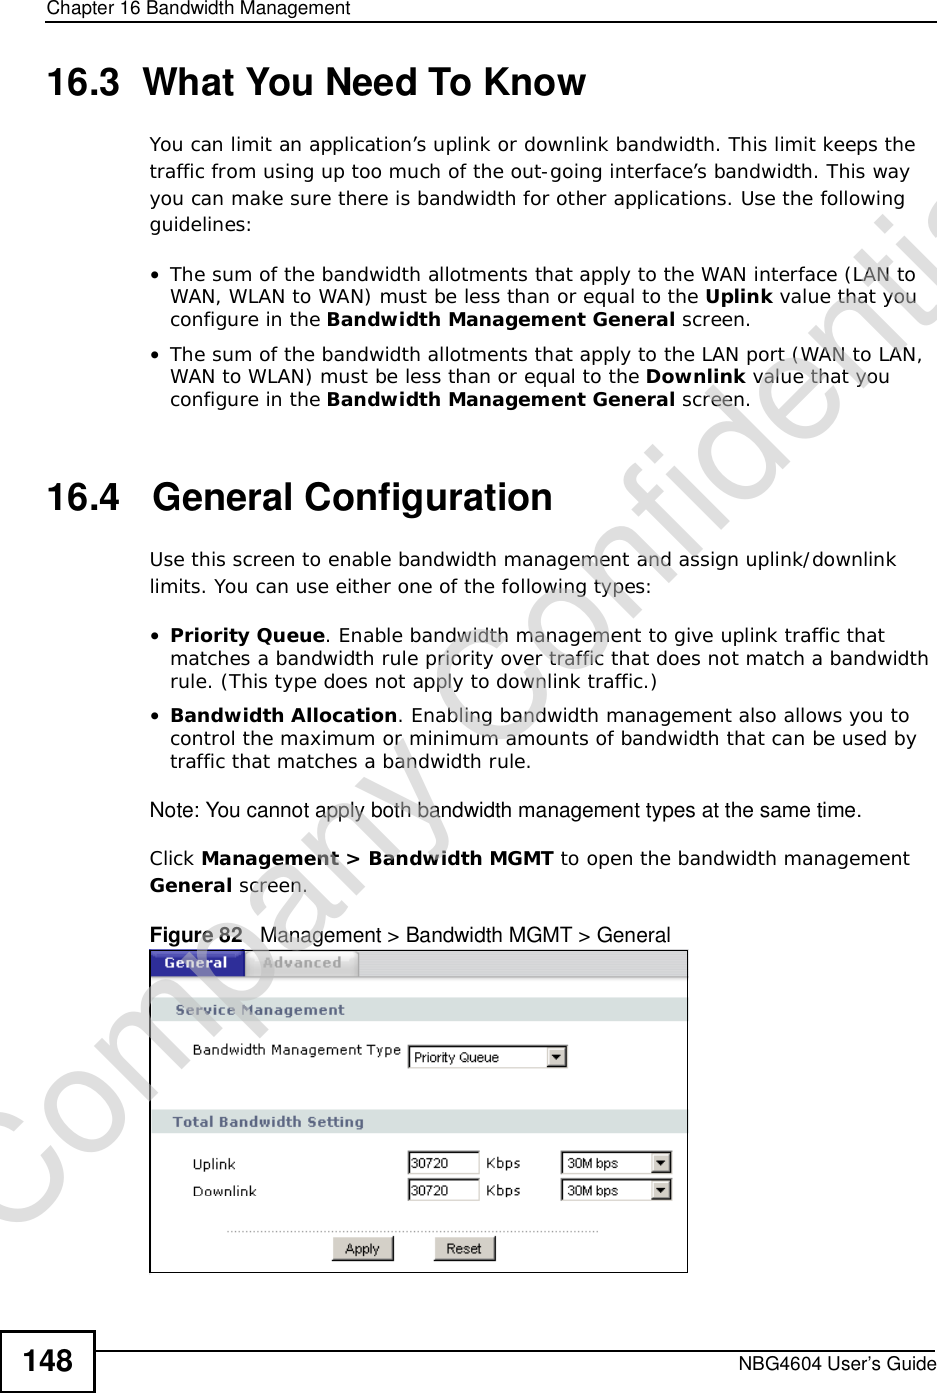 Chapter 16Bandwidth ManagementNBG4604 User’s Guide14816.3  What You Need To KnowYou can limit an application’s uplink or downlink bandwidth. This limit keeps the traffic from using up too much of the out-going interface’s bandwidth. This way you can make sure there is bandwidth for other applications. Use the following guidelines:•The sum of the bandwidth allotments that apply to the WAN interface (LAN to WAN, WLAN to WAN) must be less than or equal to the Uplink value that you configure in the Bandwidth ManagementGeneral screen. •The sum of the bandwidth allotments that apply to the LAN port (WAN to LAN, WAN to WLAN) must be less than or equal to the Downlink value that you configure in the Bandwidth ManagementGeneral screen.  16.4   General Configuration Use this screen to enable bandwidth management and assign uplink/downlink limits. You can use either one of the following types:•Priority Queue. Enable bandwidth management to give uplink traffic that matches a bandwidth rule priority over traffic that does not match a bandwidth rule. (This type does not apply to downlink traffic.)  •Bandwidth Allocation. Enabling bandwidth management also allows you to control the maximum or minimum amounts of bandwidth that can be used by traffic that matches a bandwidth rule.Note: You cannot apply both bandwidth management types at the same time.Click Management&gt; Bandwidth MGMT to open the bandwidth management General screen.Figure 82   Management &gt; Bandwidth MGMT &gt; GeneralCompany Confidential